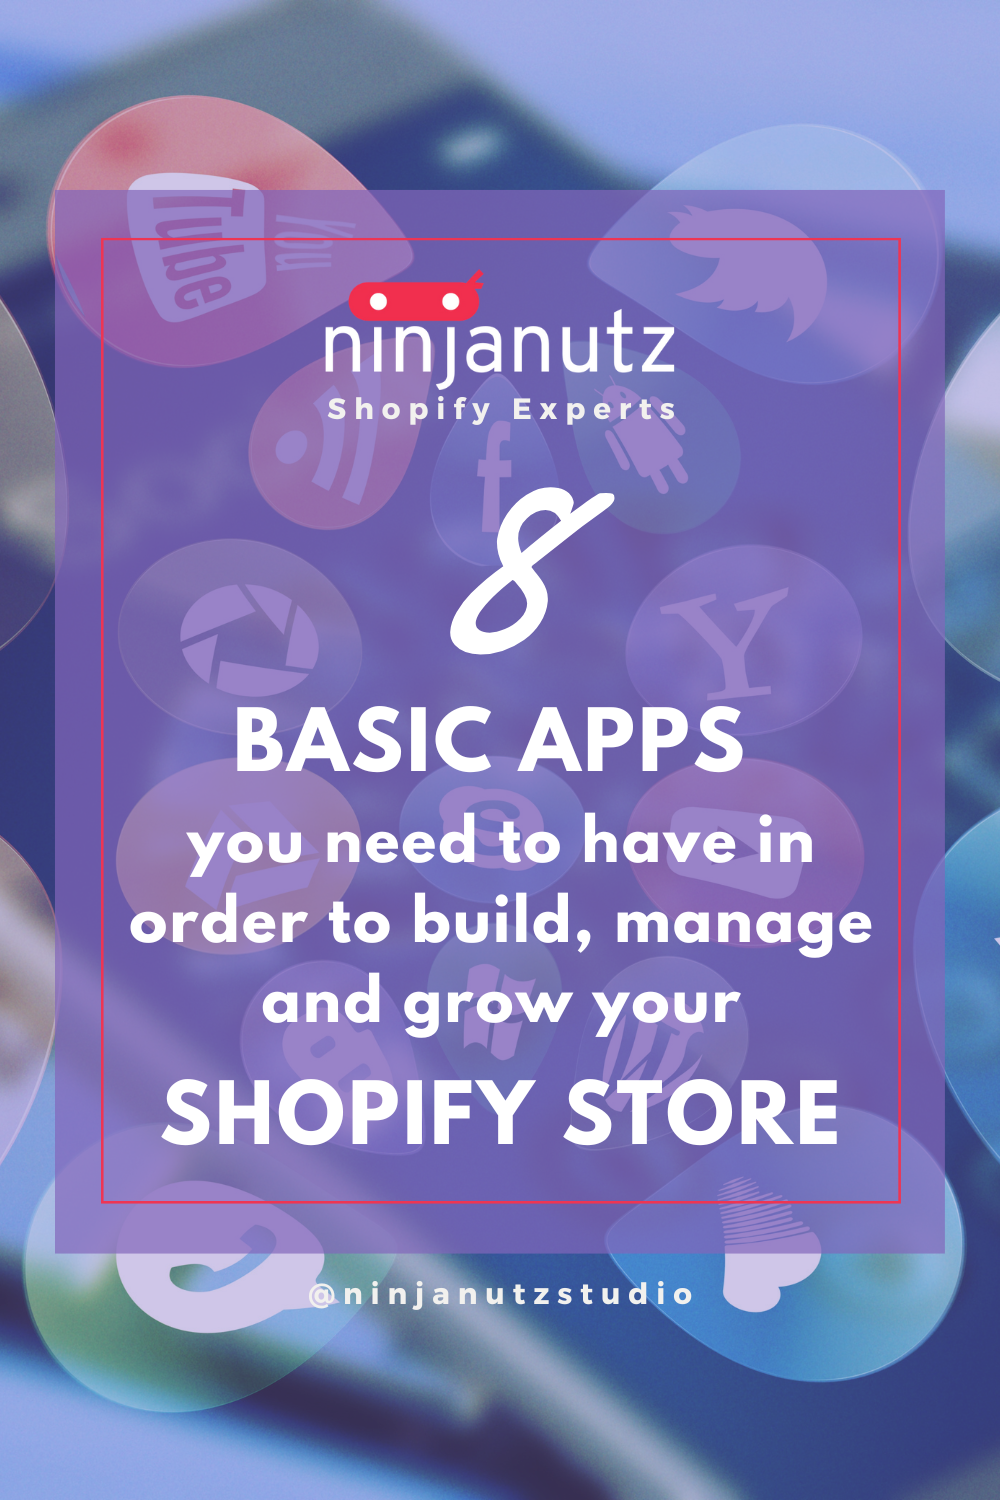 8 basic apps you need to have in order to build, manage and grow your Shopify store NinjaNutz®